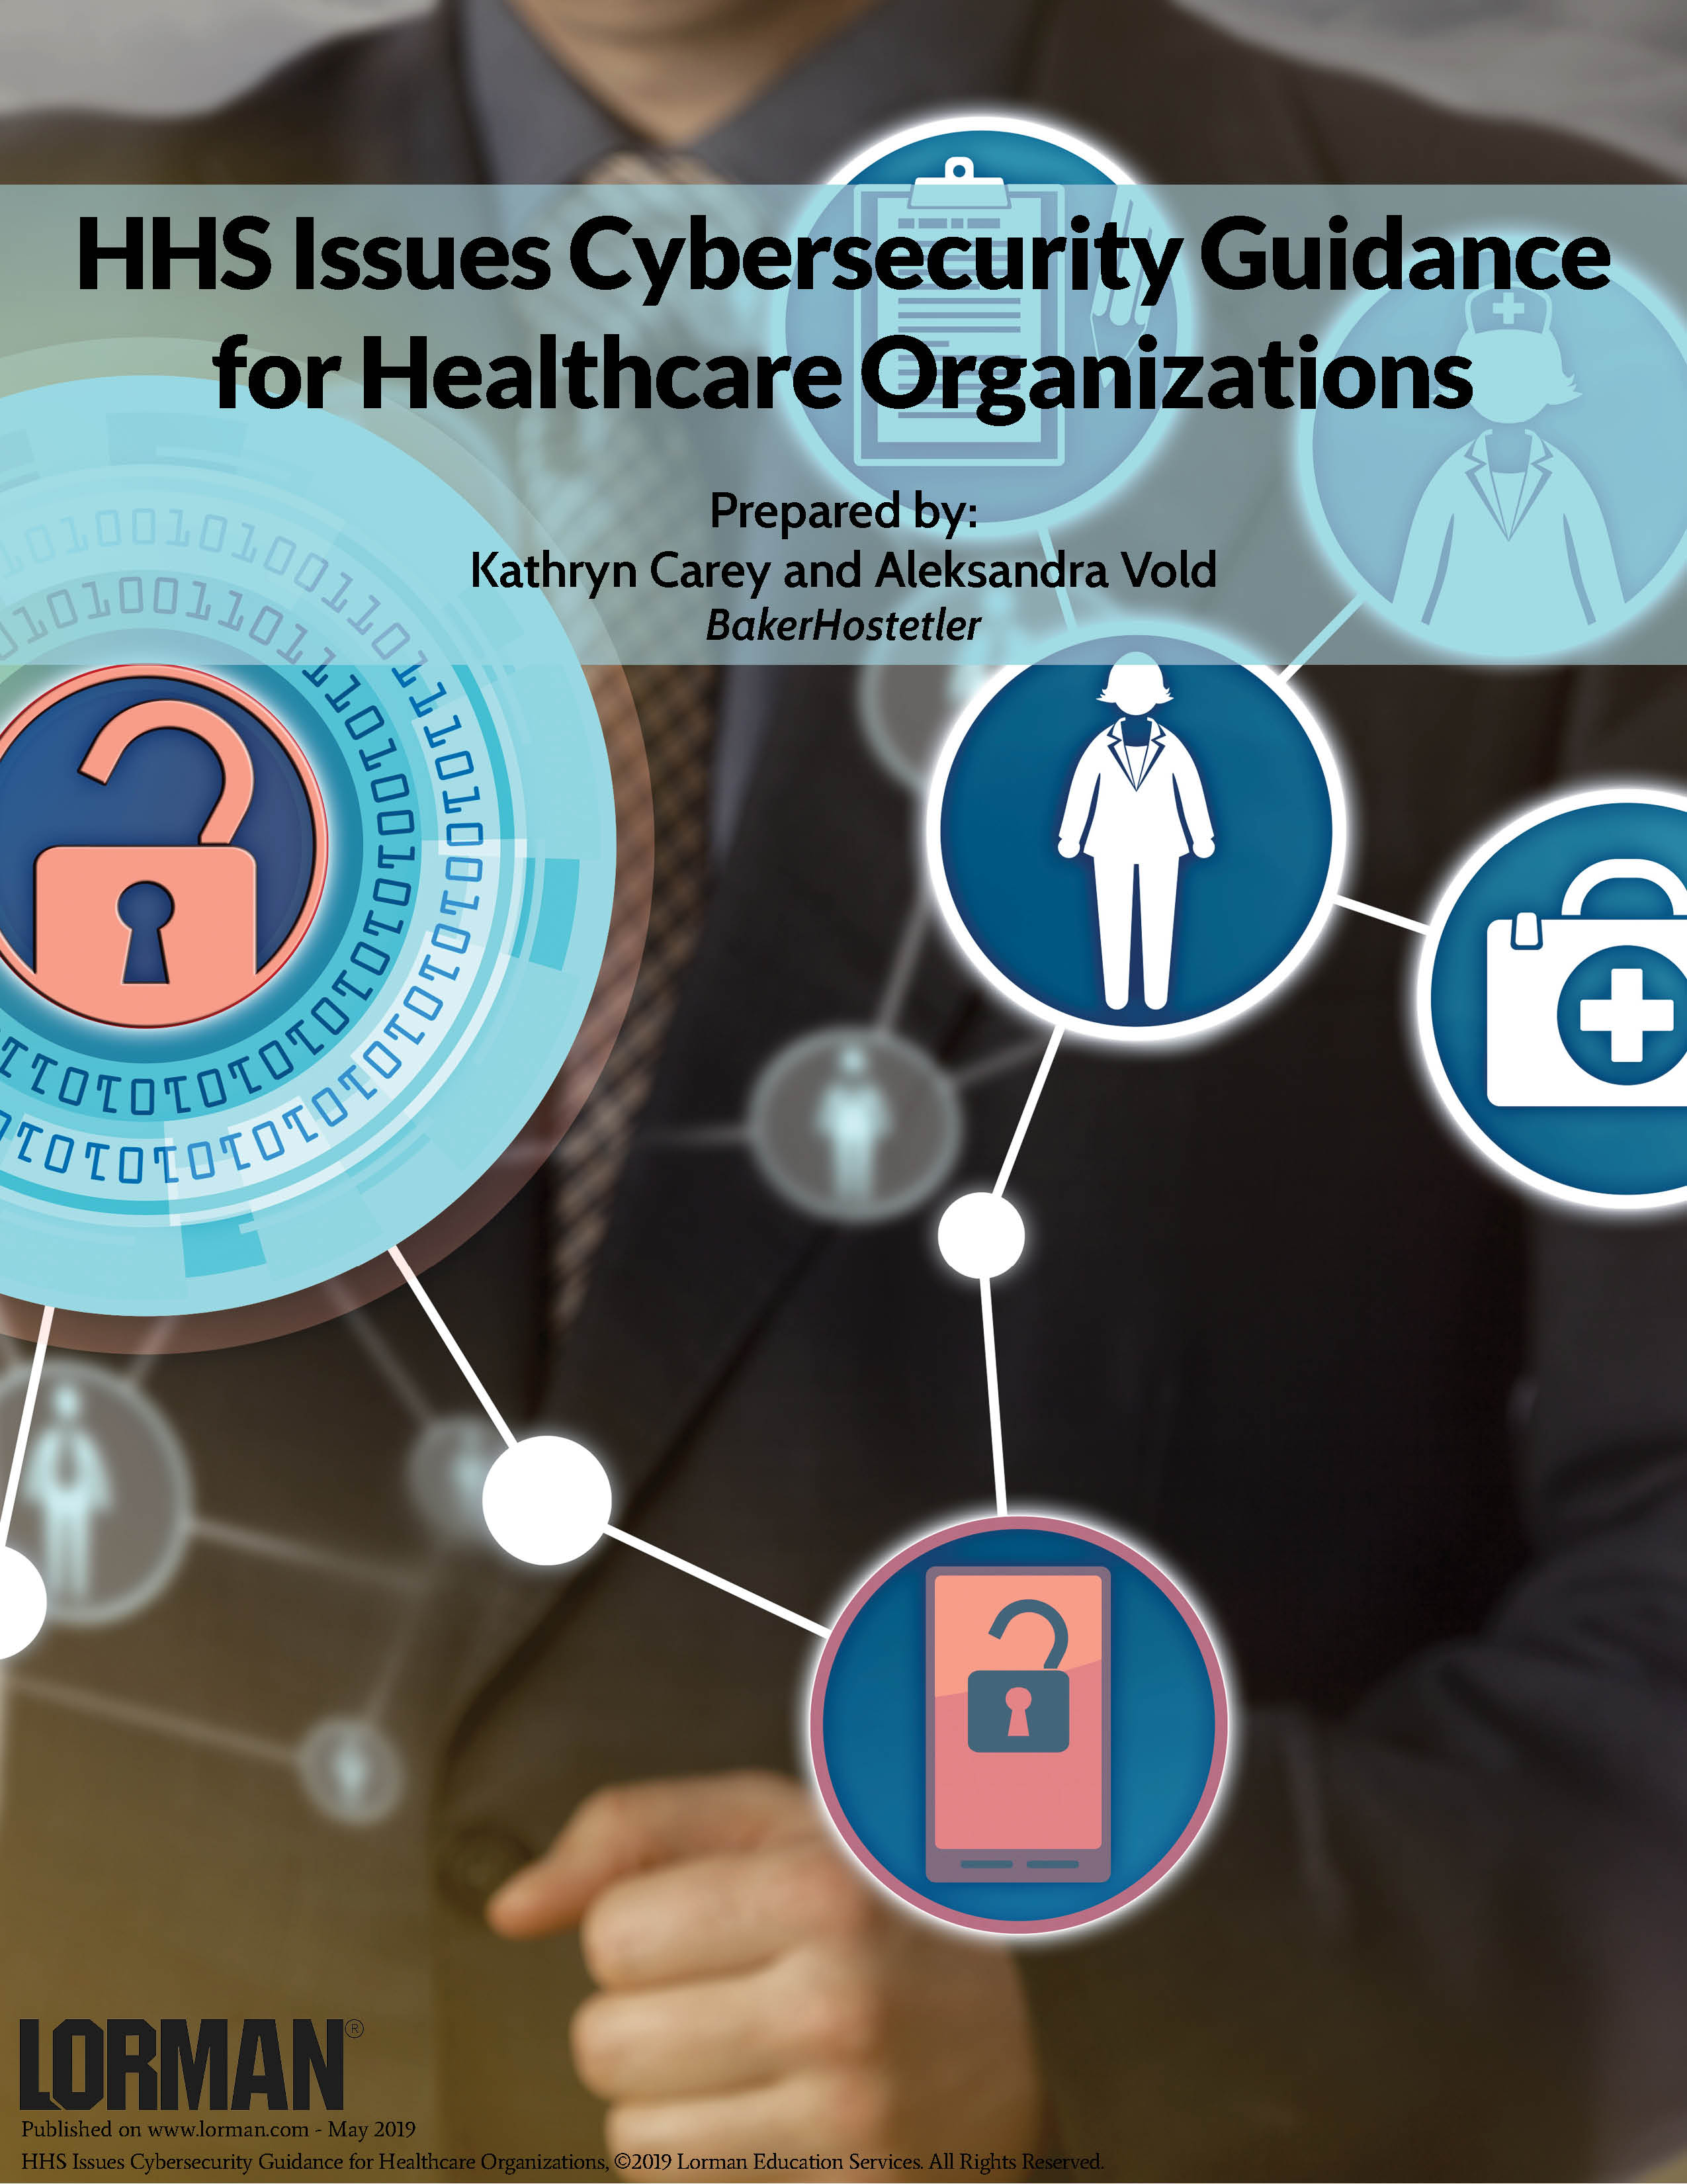 HHS Issues Cybersecurity Guidance for Healthcare Organizations